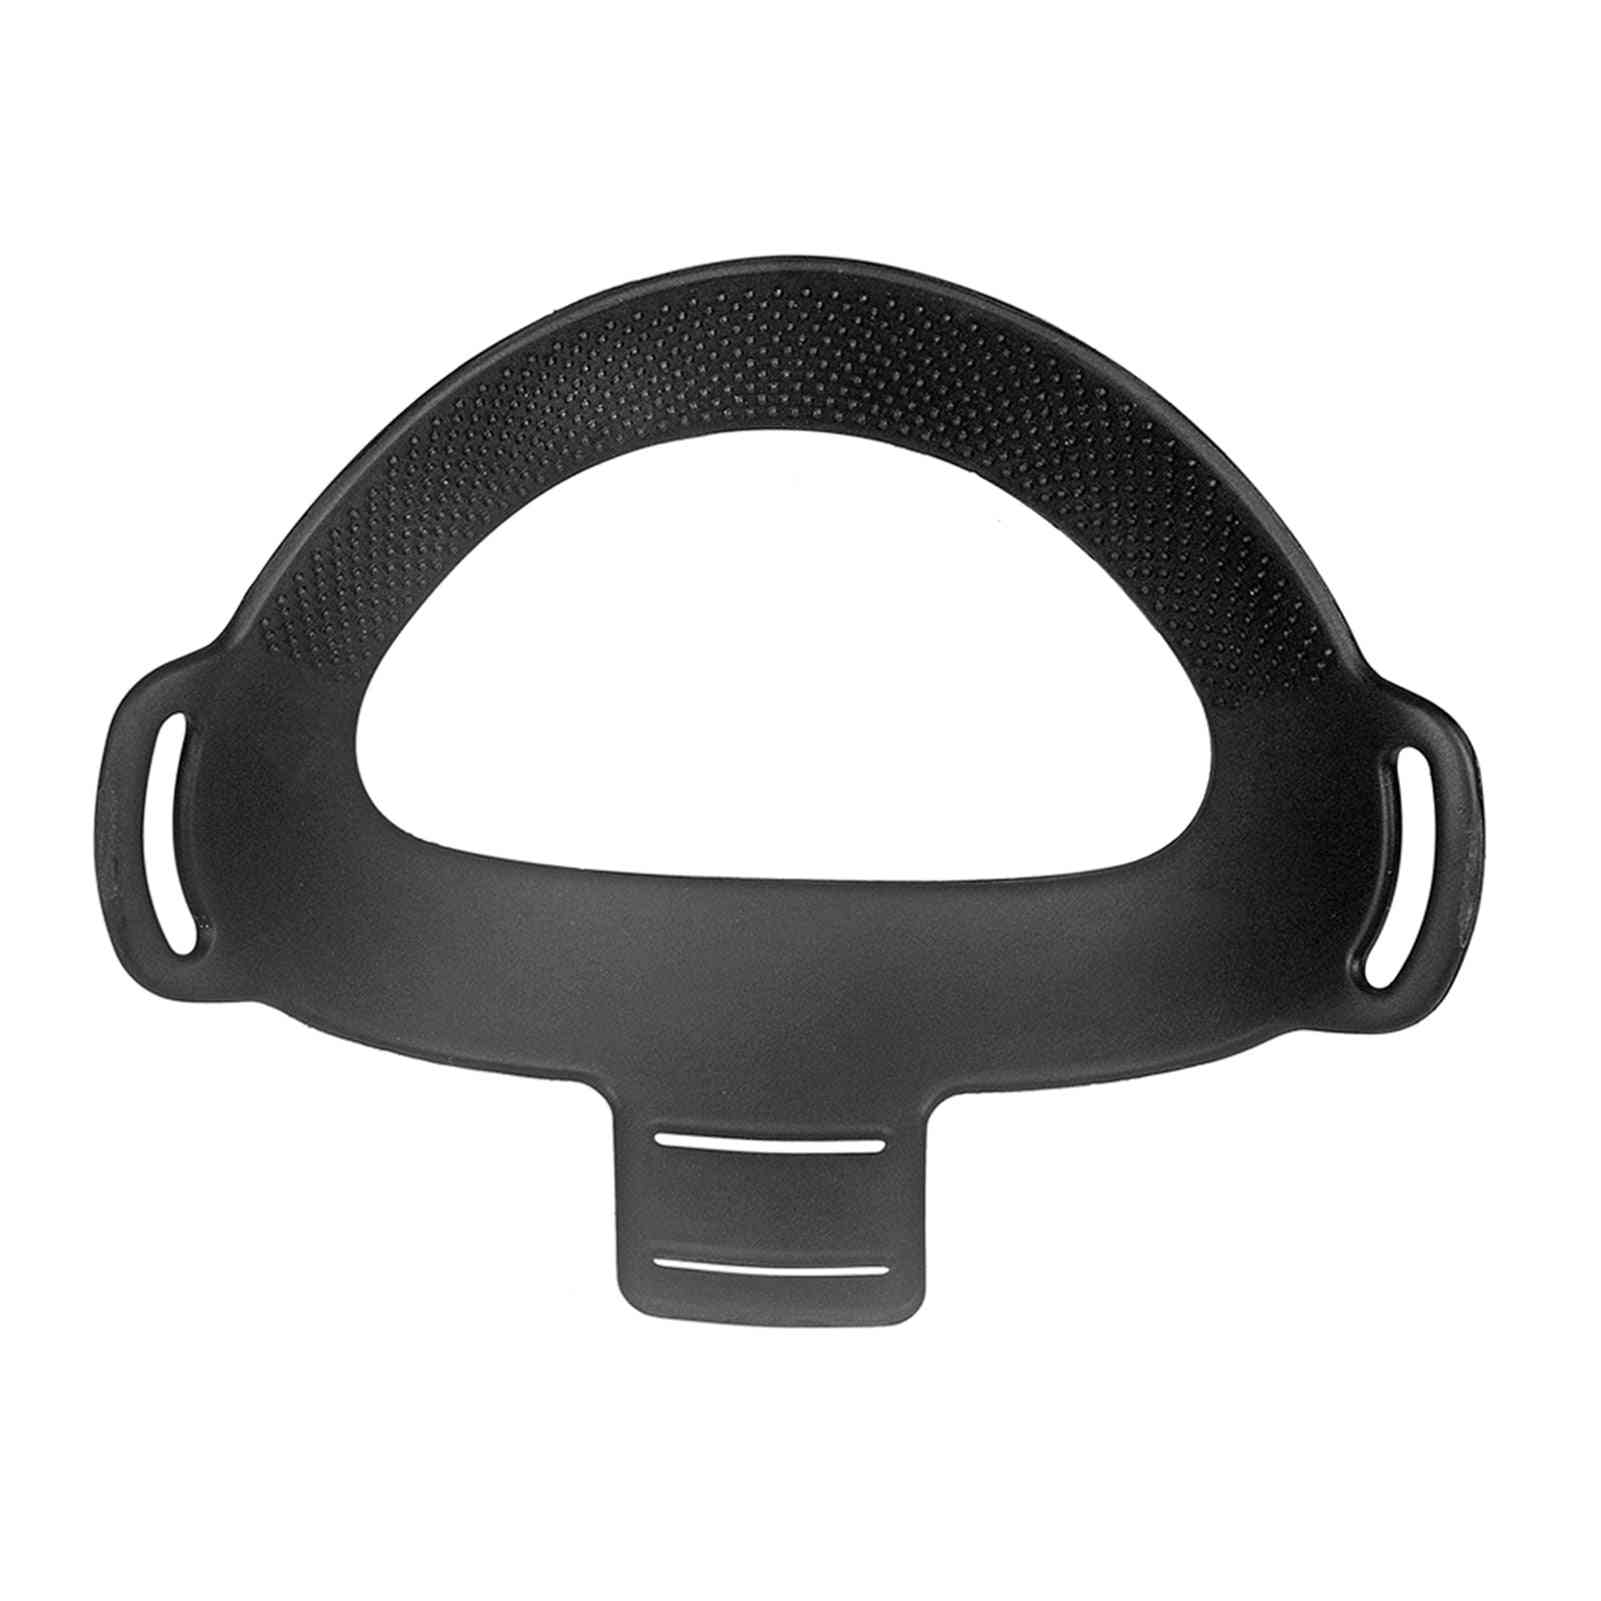 Headband Cushion For Oculus Quest, Vr Headsets, Pad